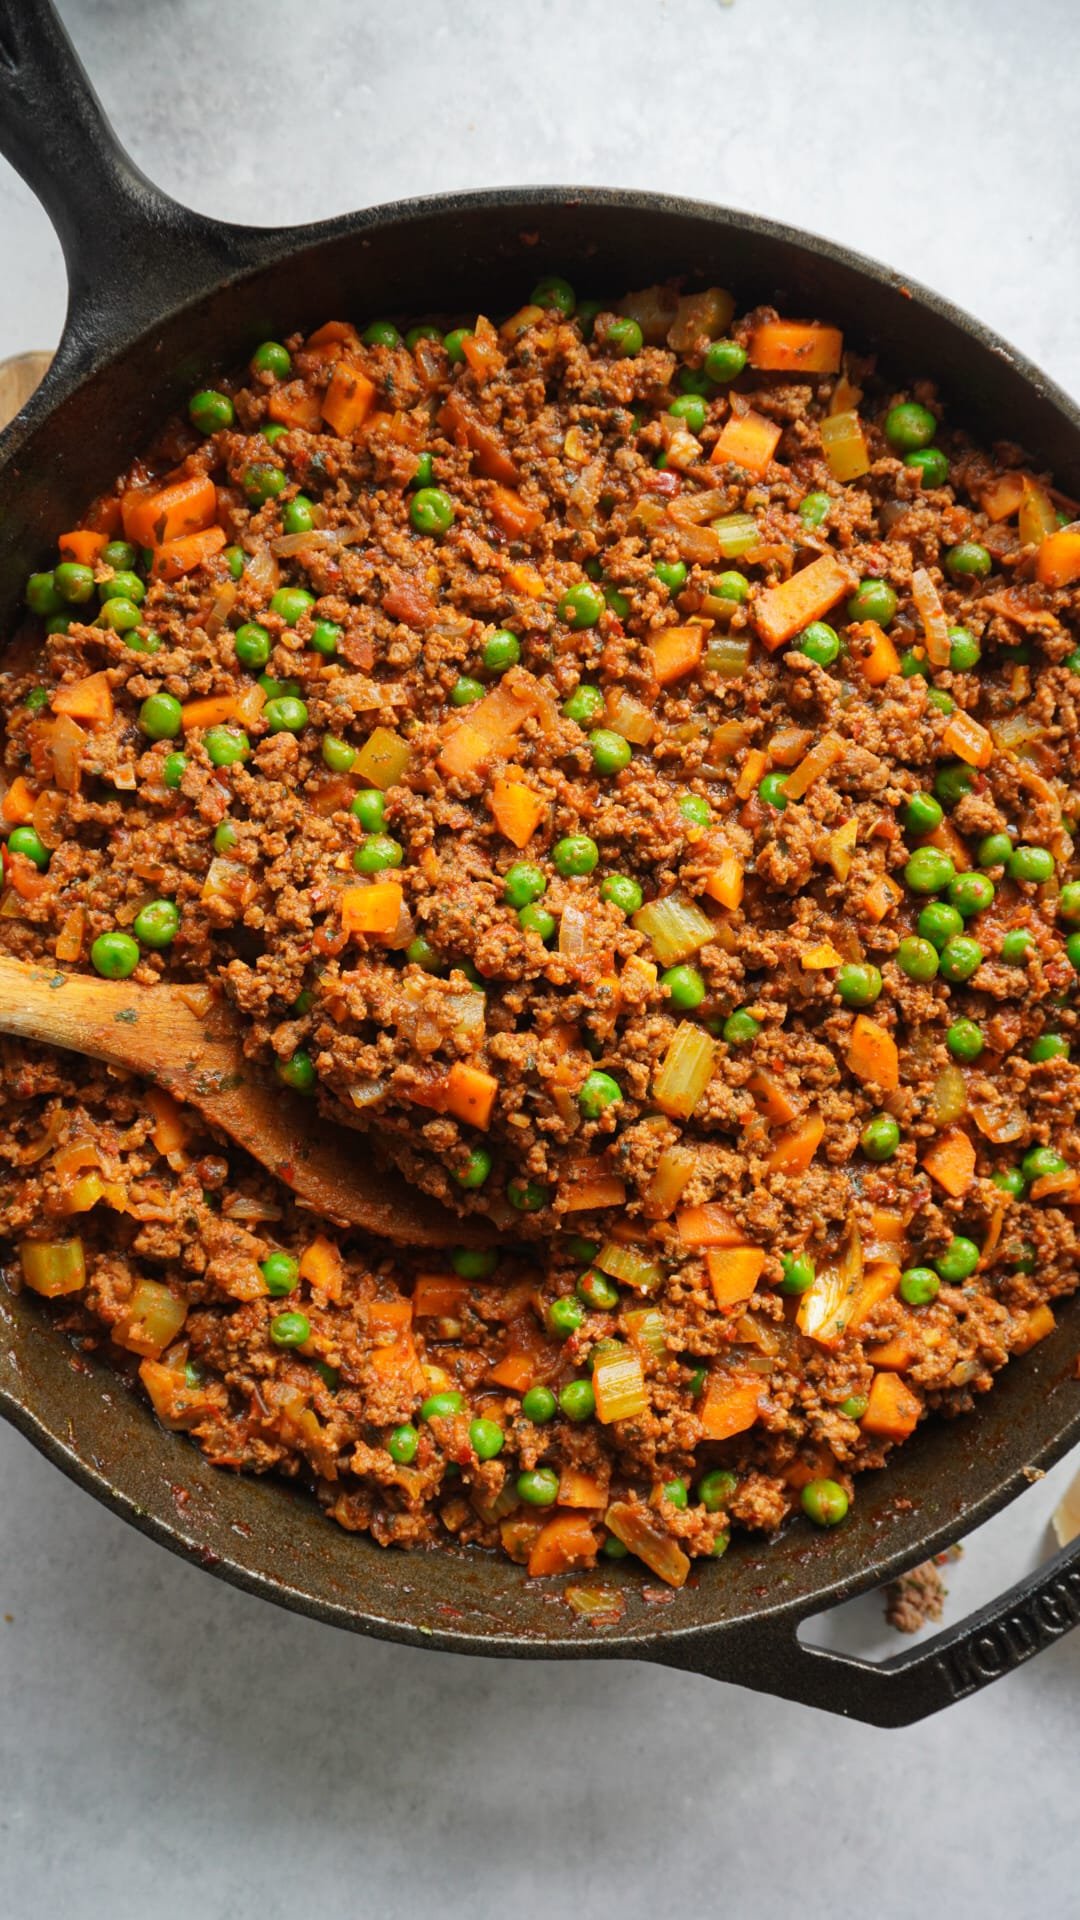 The mixture of a Classic English Shepherds Pie